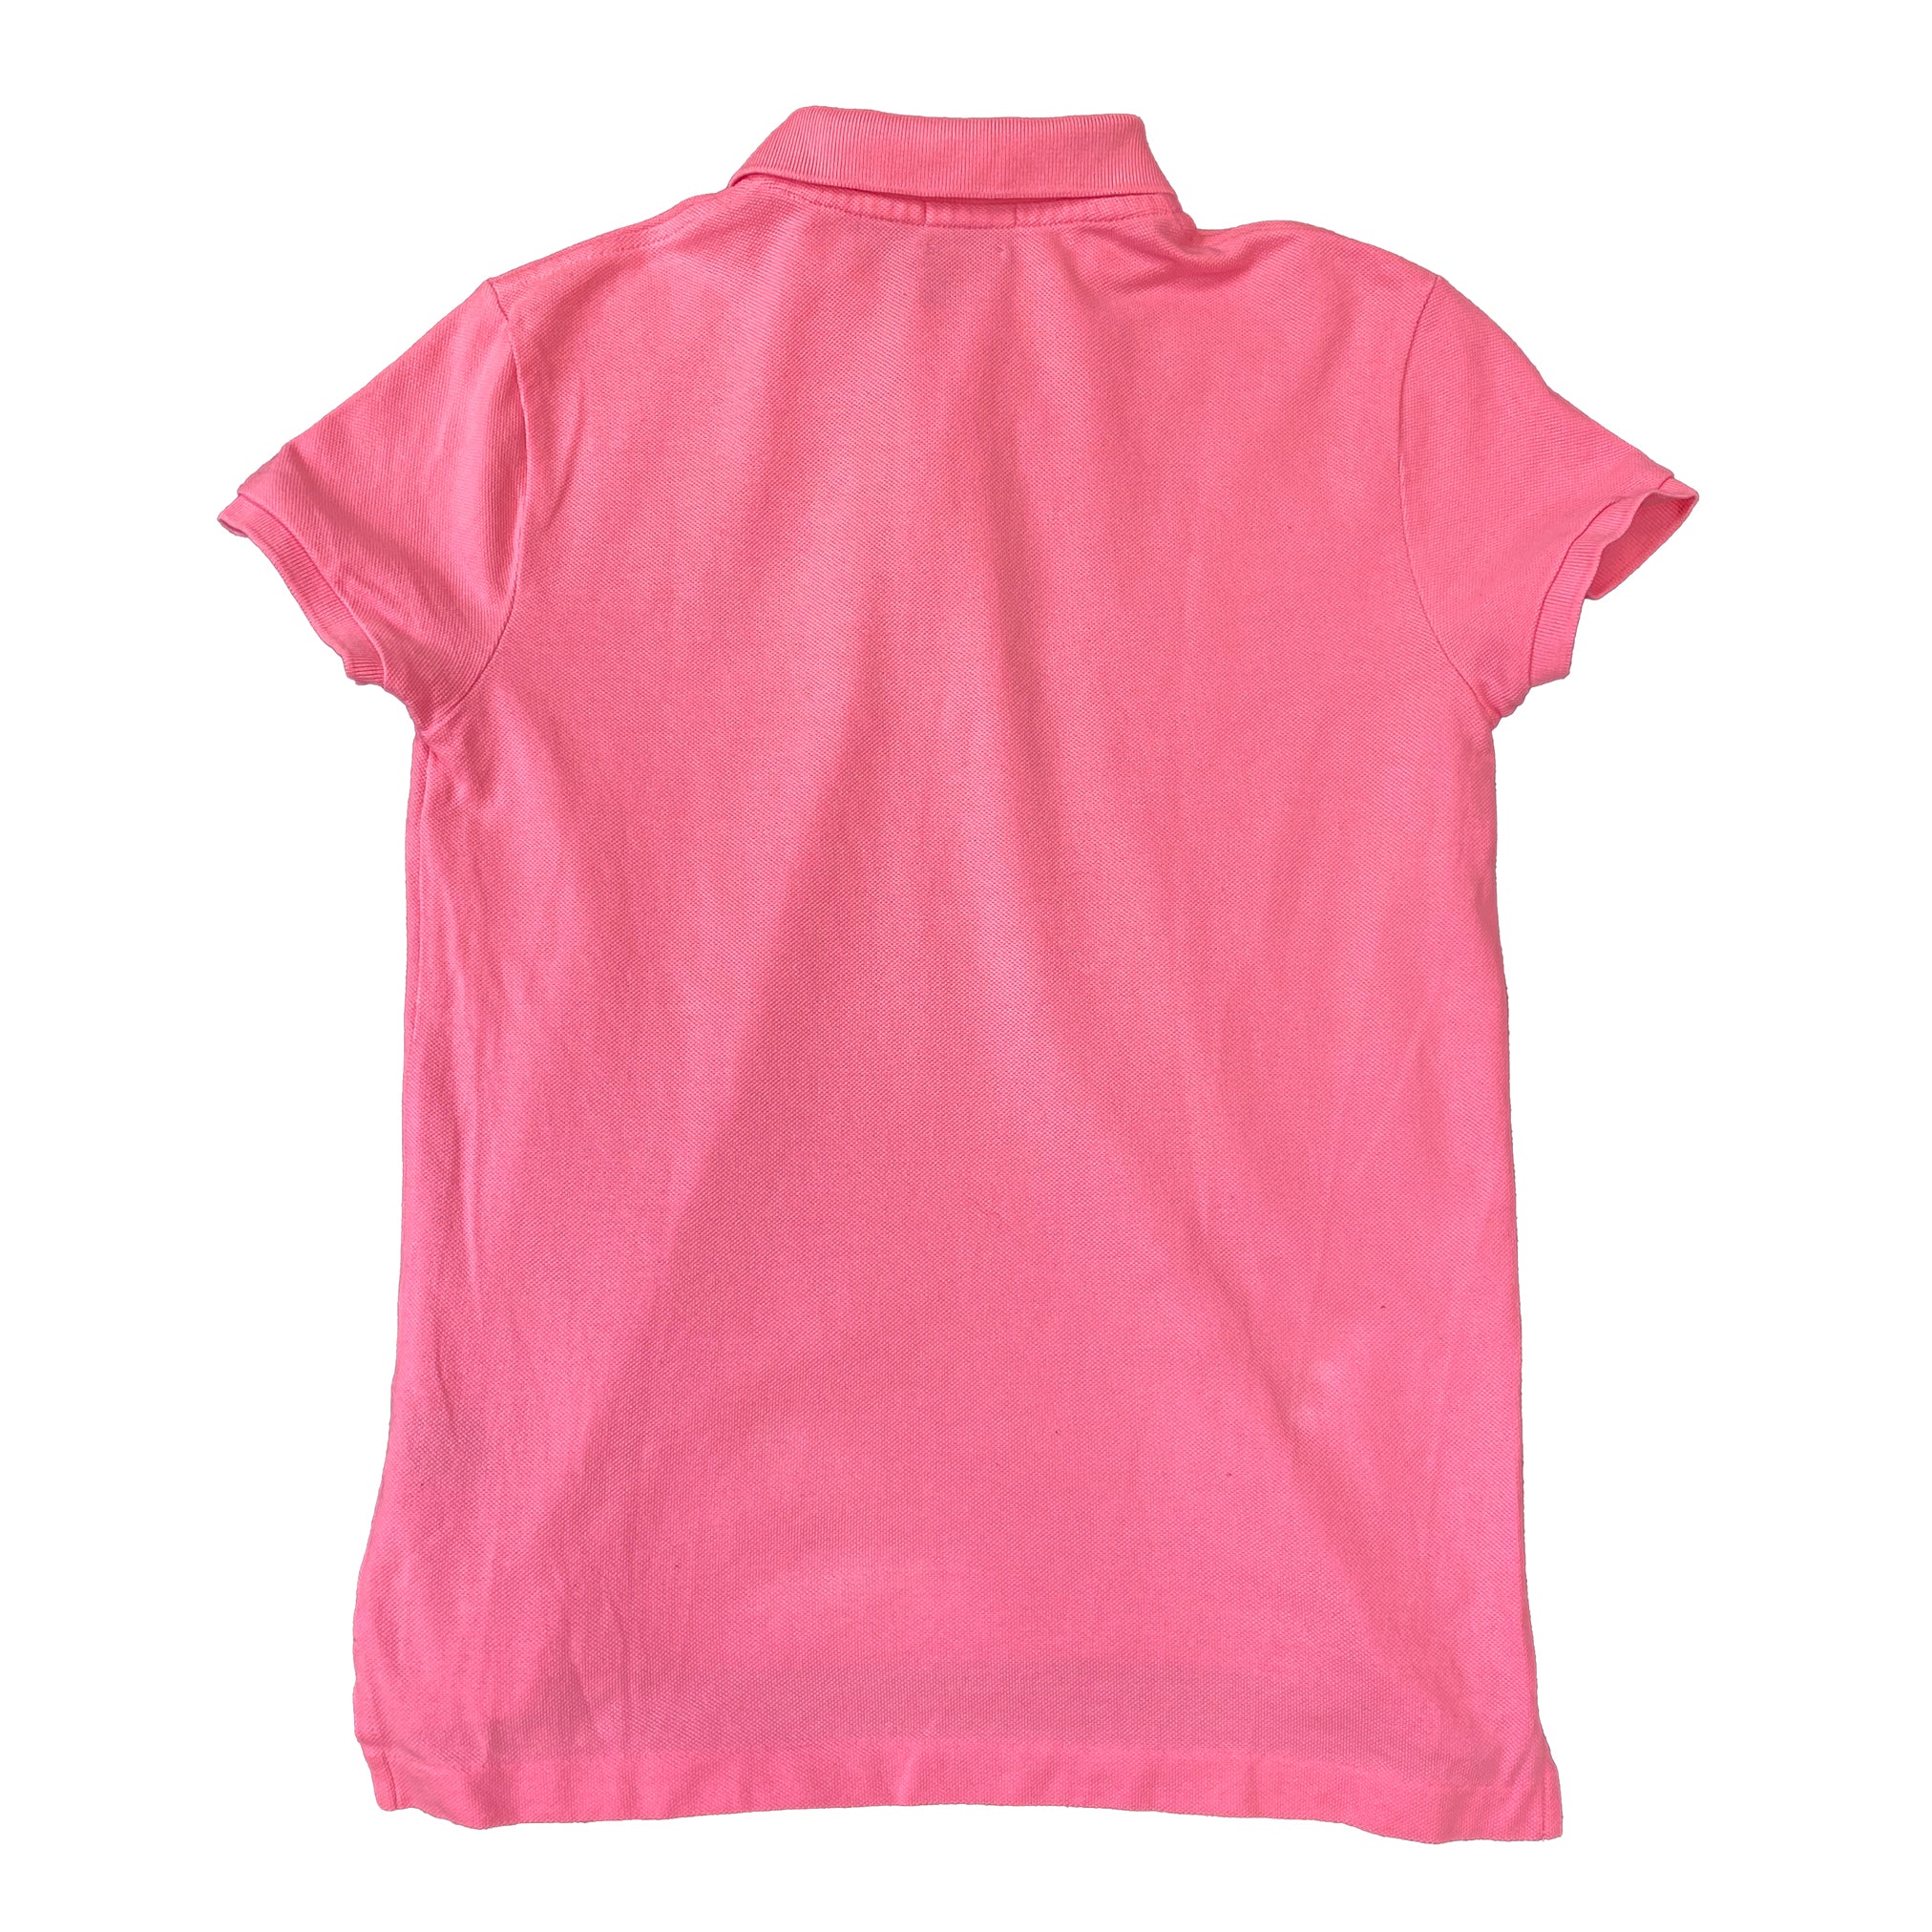 Polo by Ralph Lauren Bright Pink Polo Top